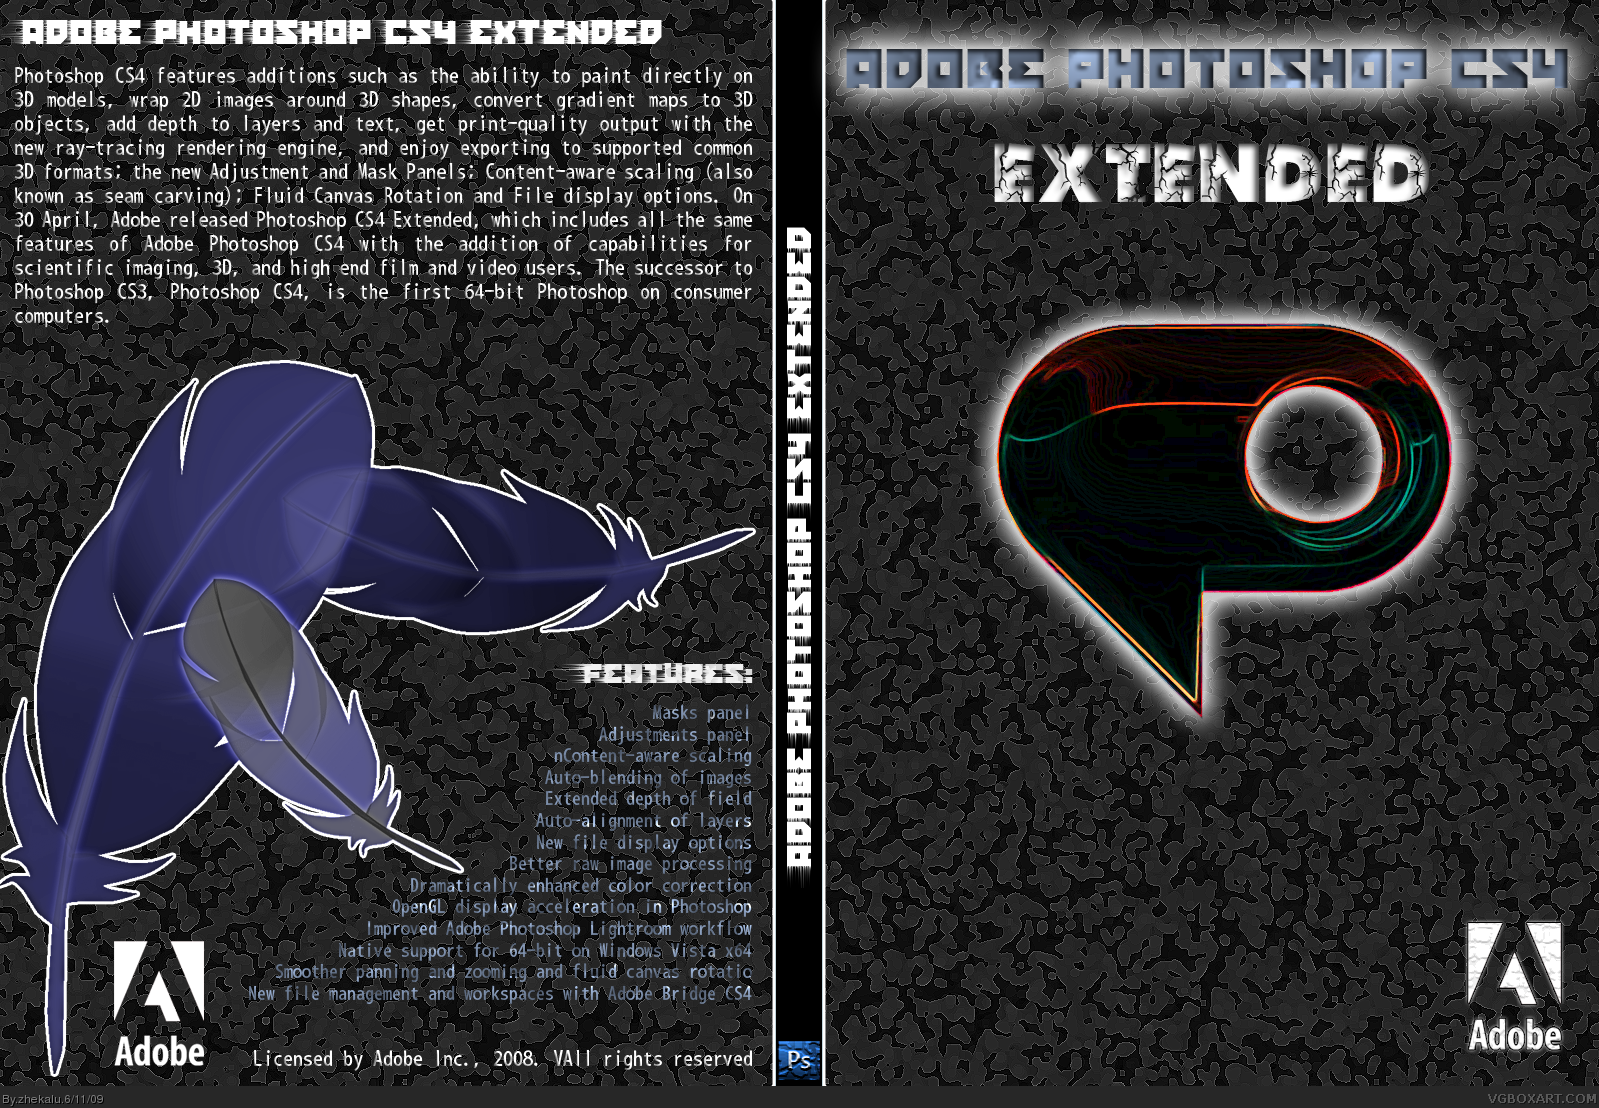 Adobe Photoshop CS4 Extended box cover